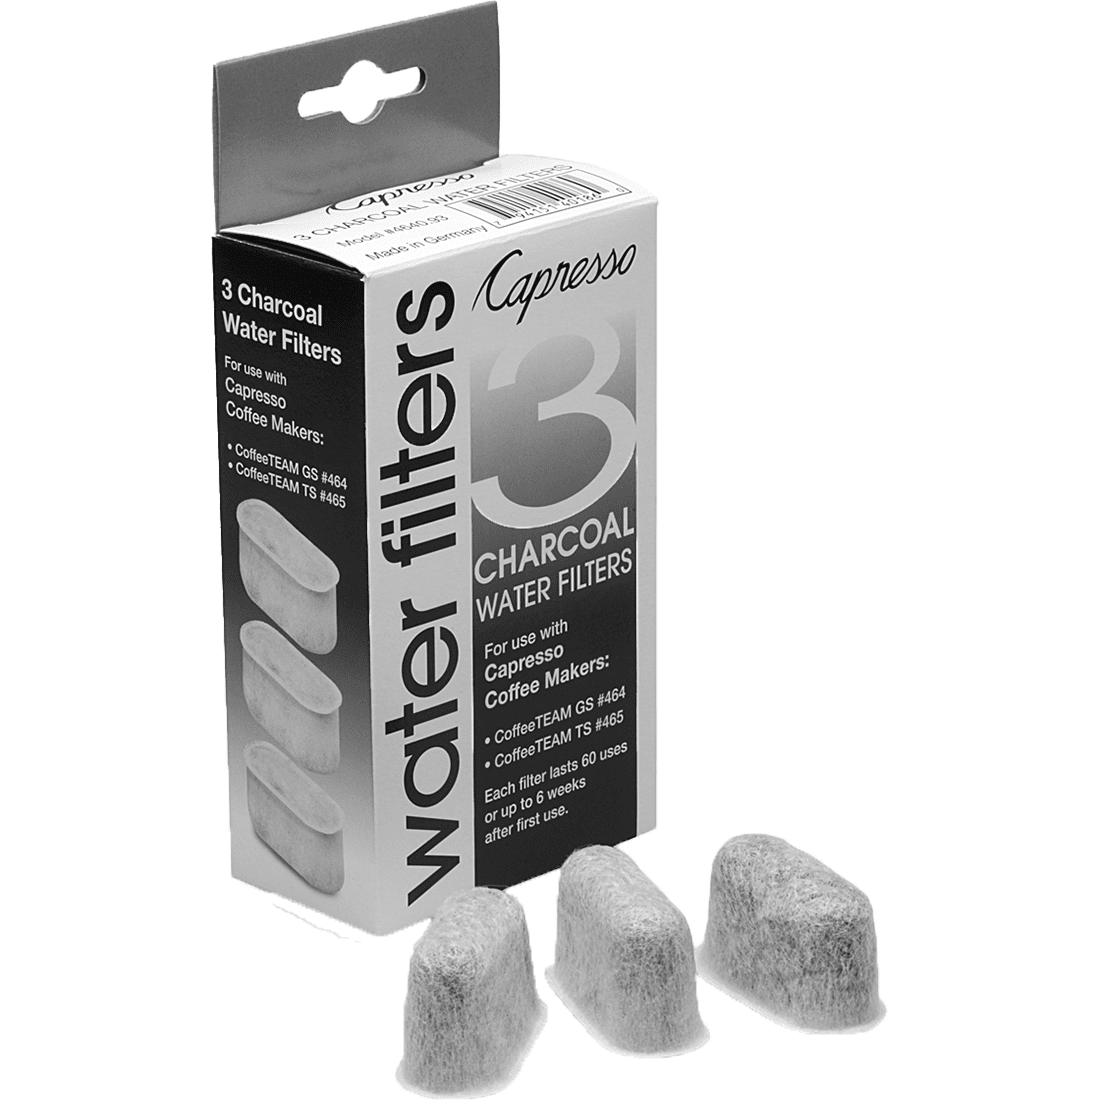 Capresso 3-pack Charcoal Water Filters (4640.93)